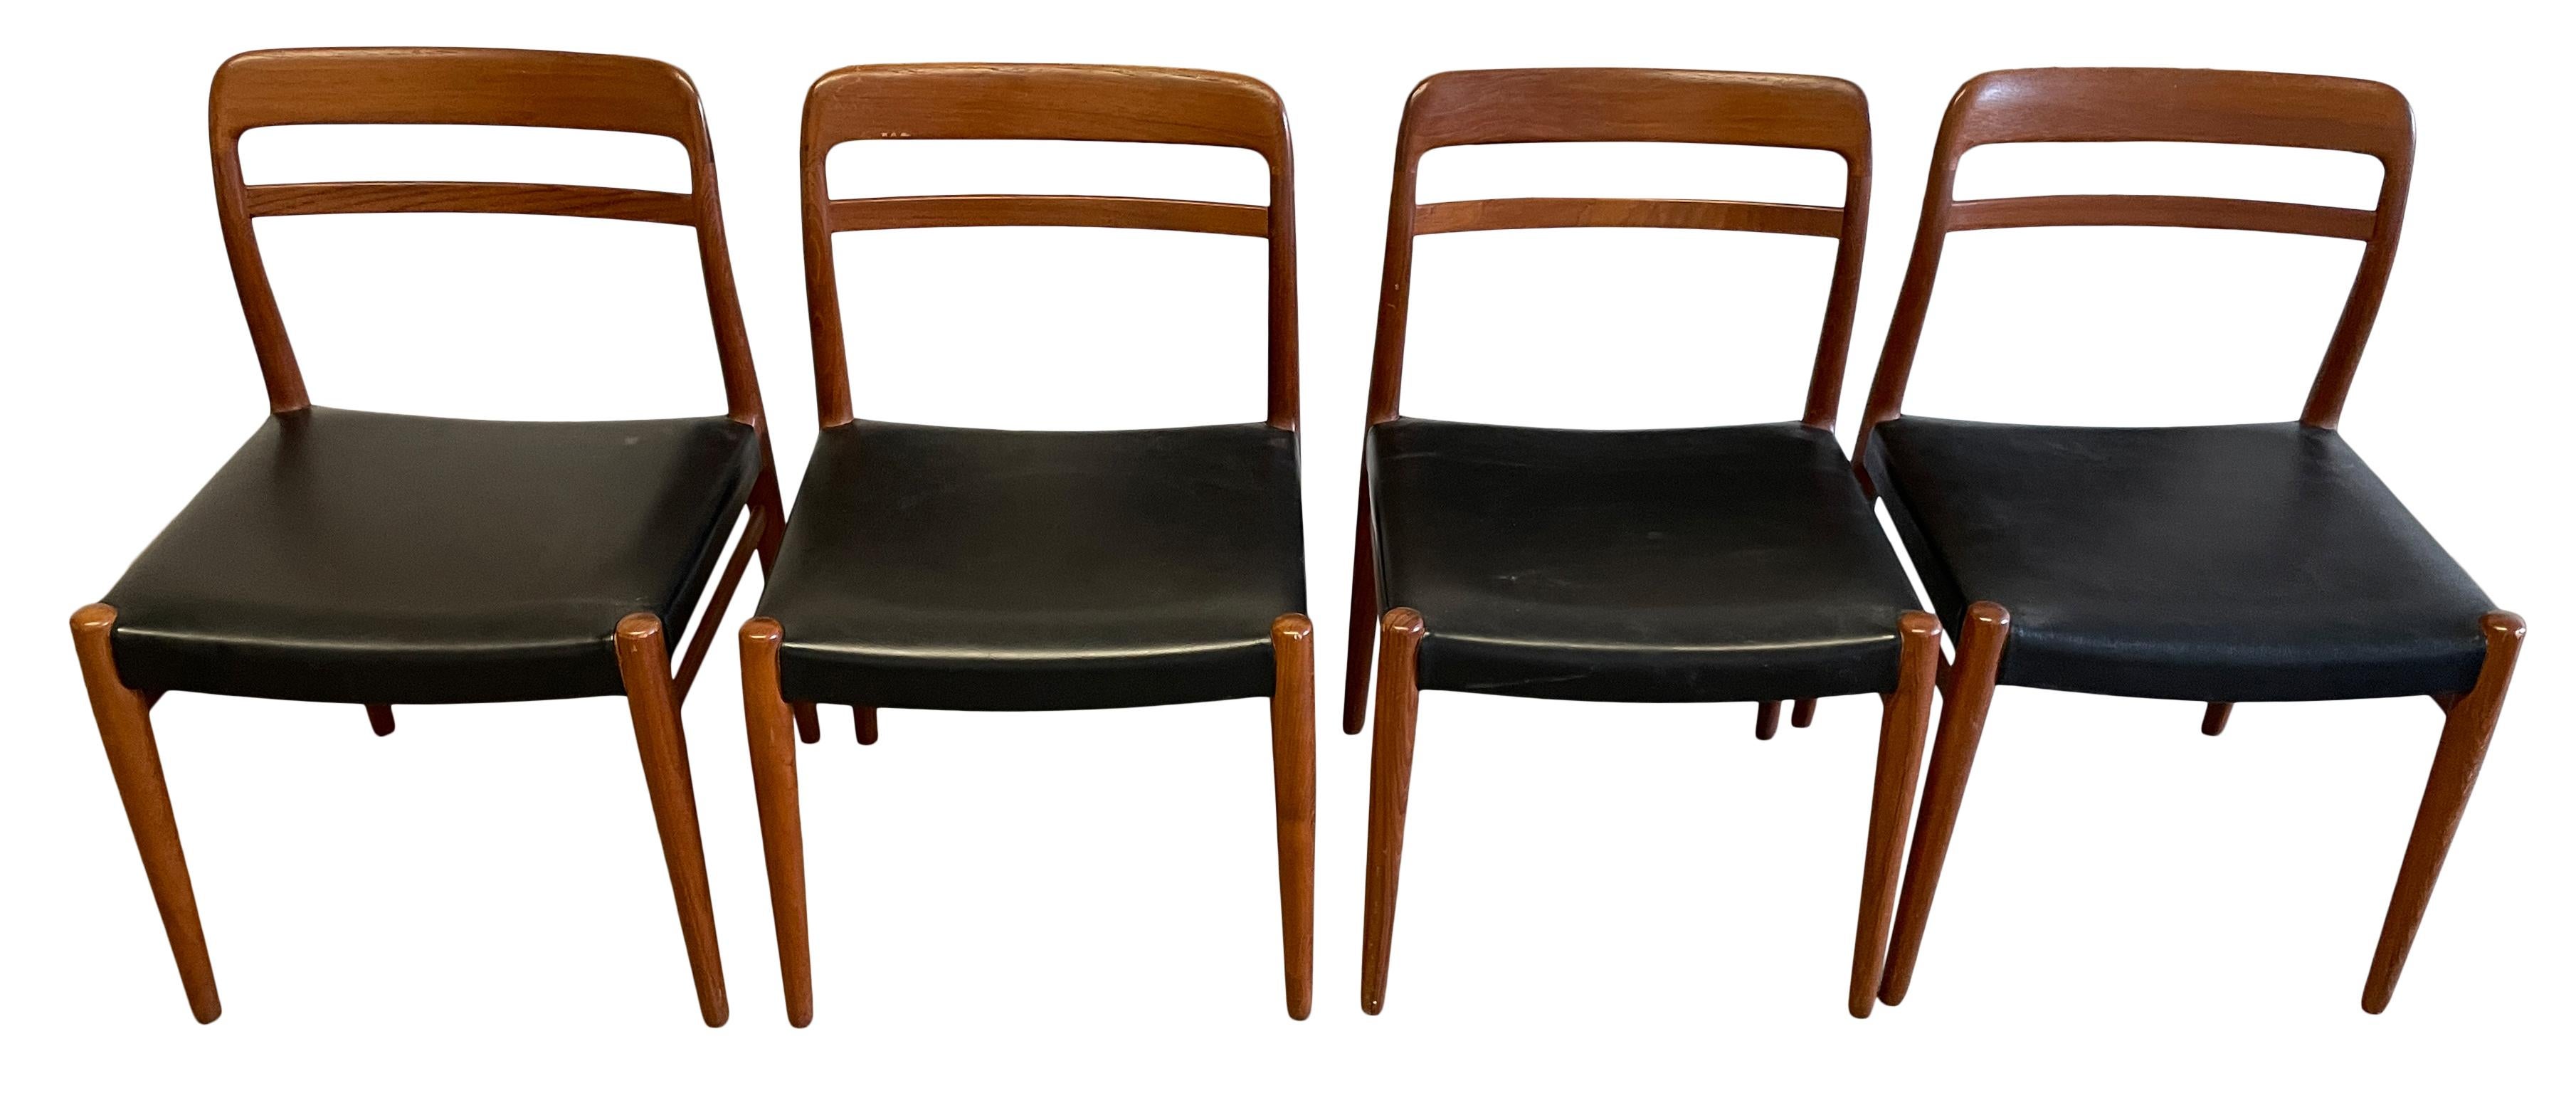 Set of 4 Mid Century Norwegian teak dining chairs curved back. Black Vinyl seat cushions - Chairs appear to be in original vintage condition. Very clean and sturdy. Stamp under seat. Located in Brooklyn NYC.

This listing is for the set of 4